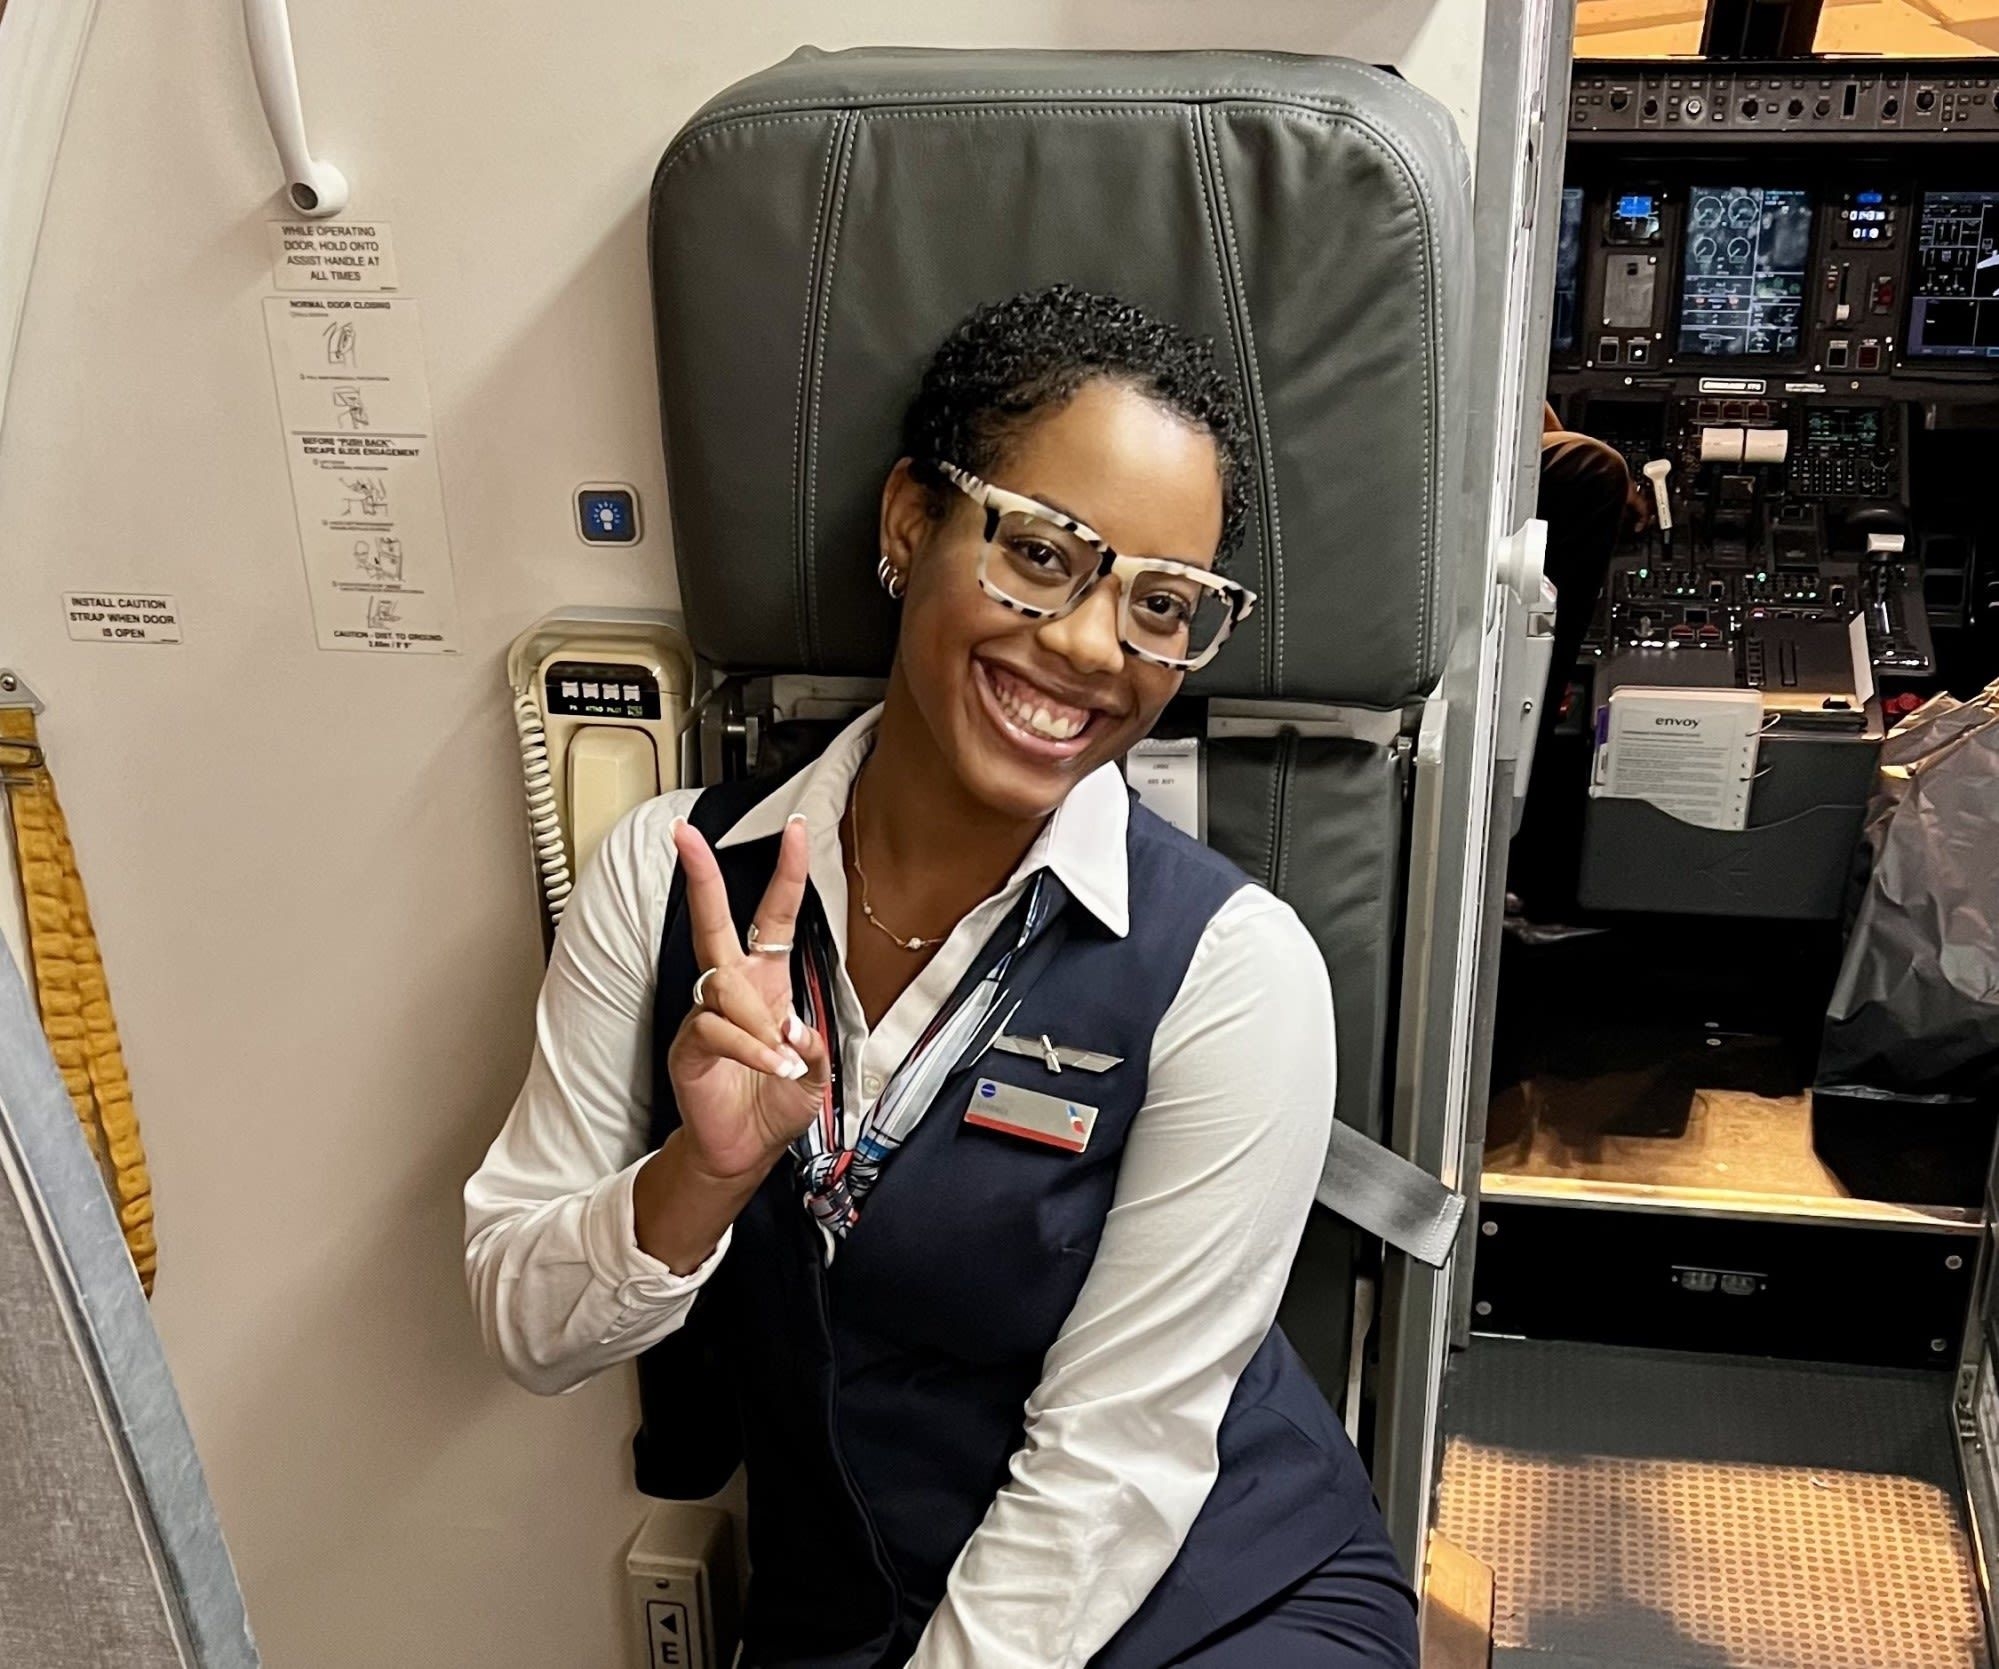 8 Things People Expect Flight Attendants To Do That Aren't Their Jobs